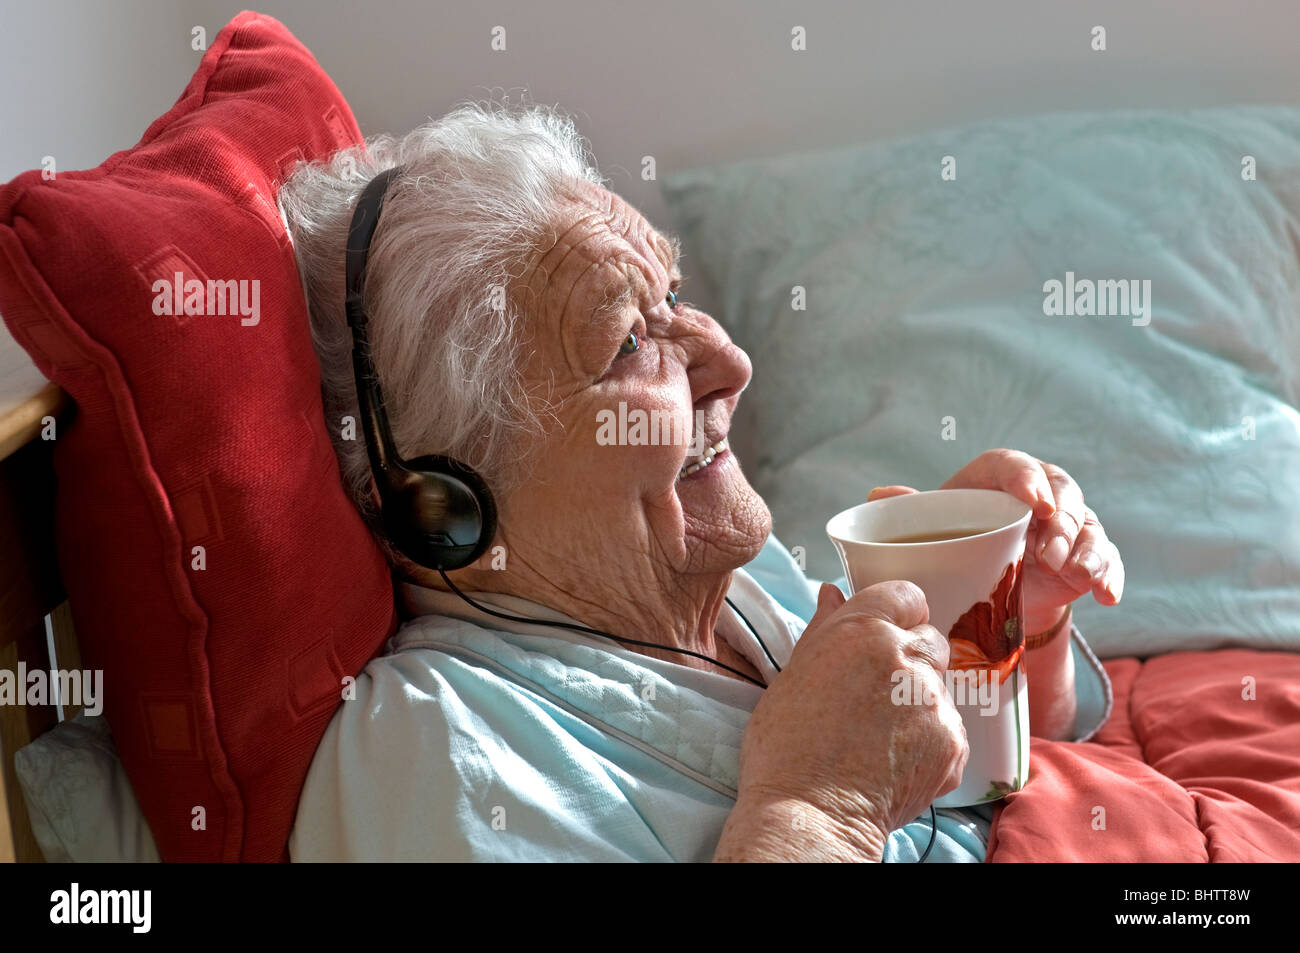 ELDERLY LADY CARE CARER Happy content elderly lady resting in bed wearing headphones enjoys a cup of tea in her sunny comfortable room Stock Photo